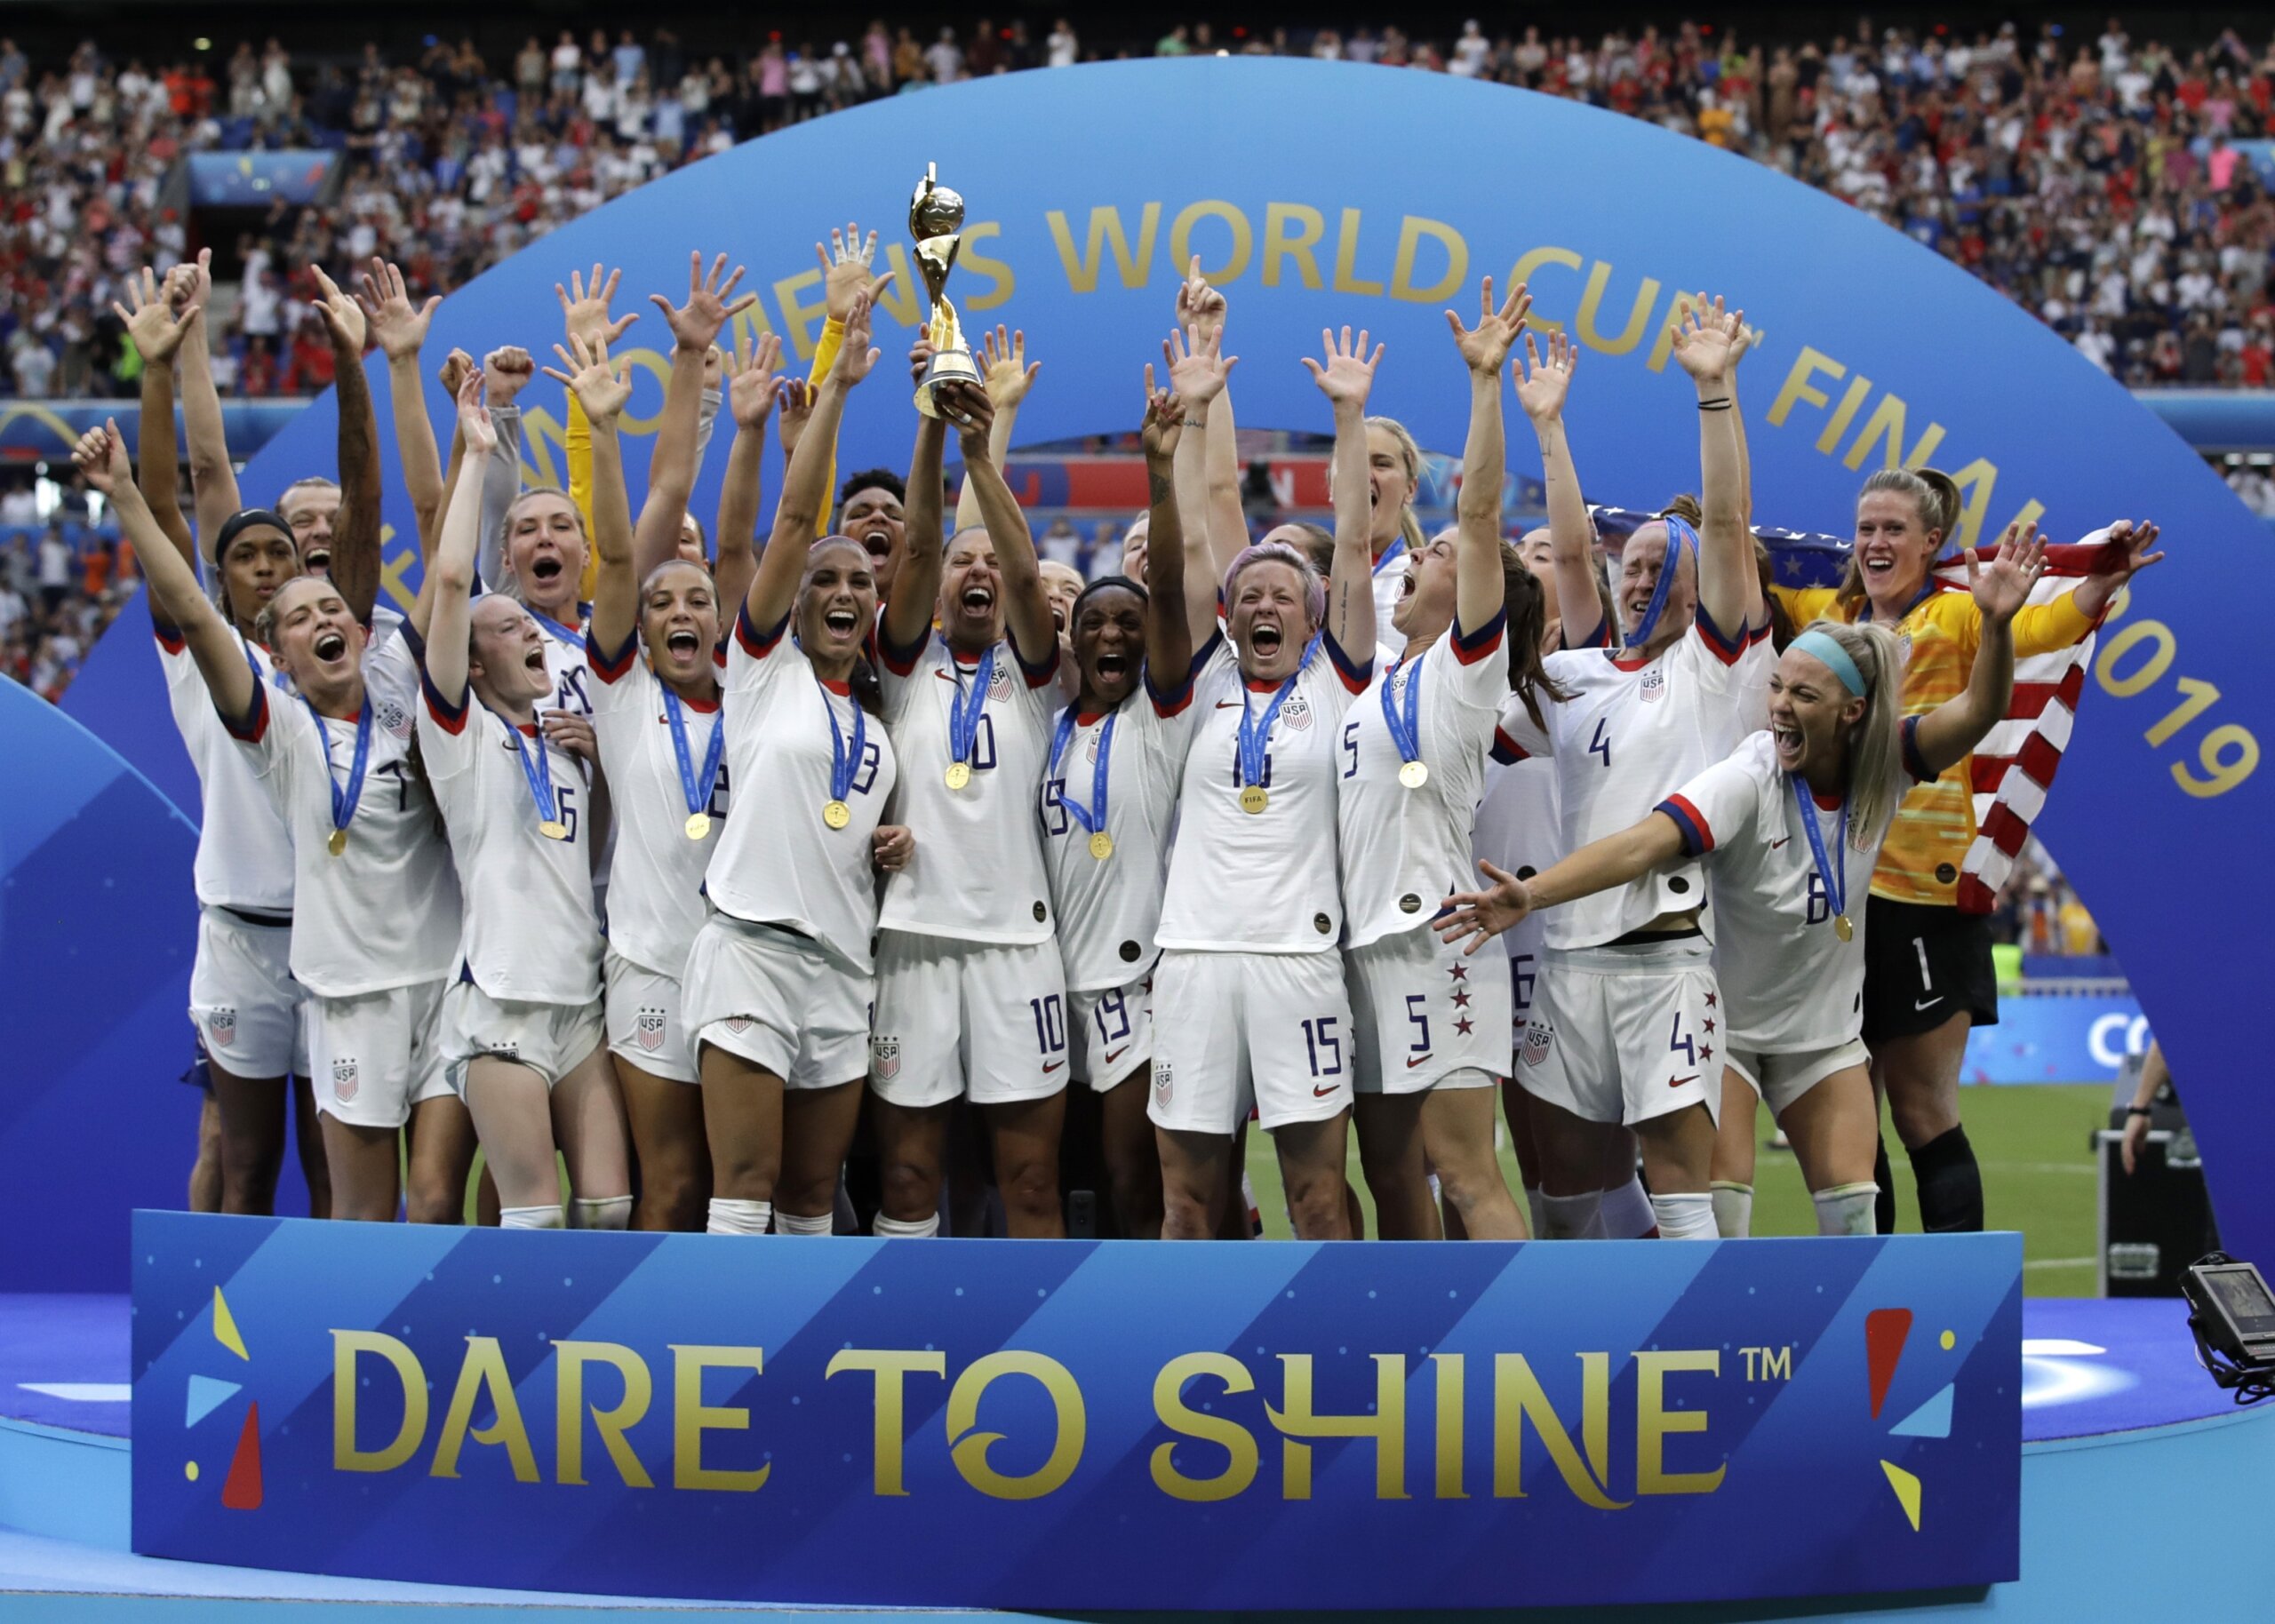 FIFA Women's World Cup: A look at all WC records before WWC 2023 - Sportstar